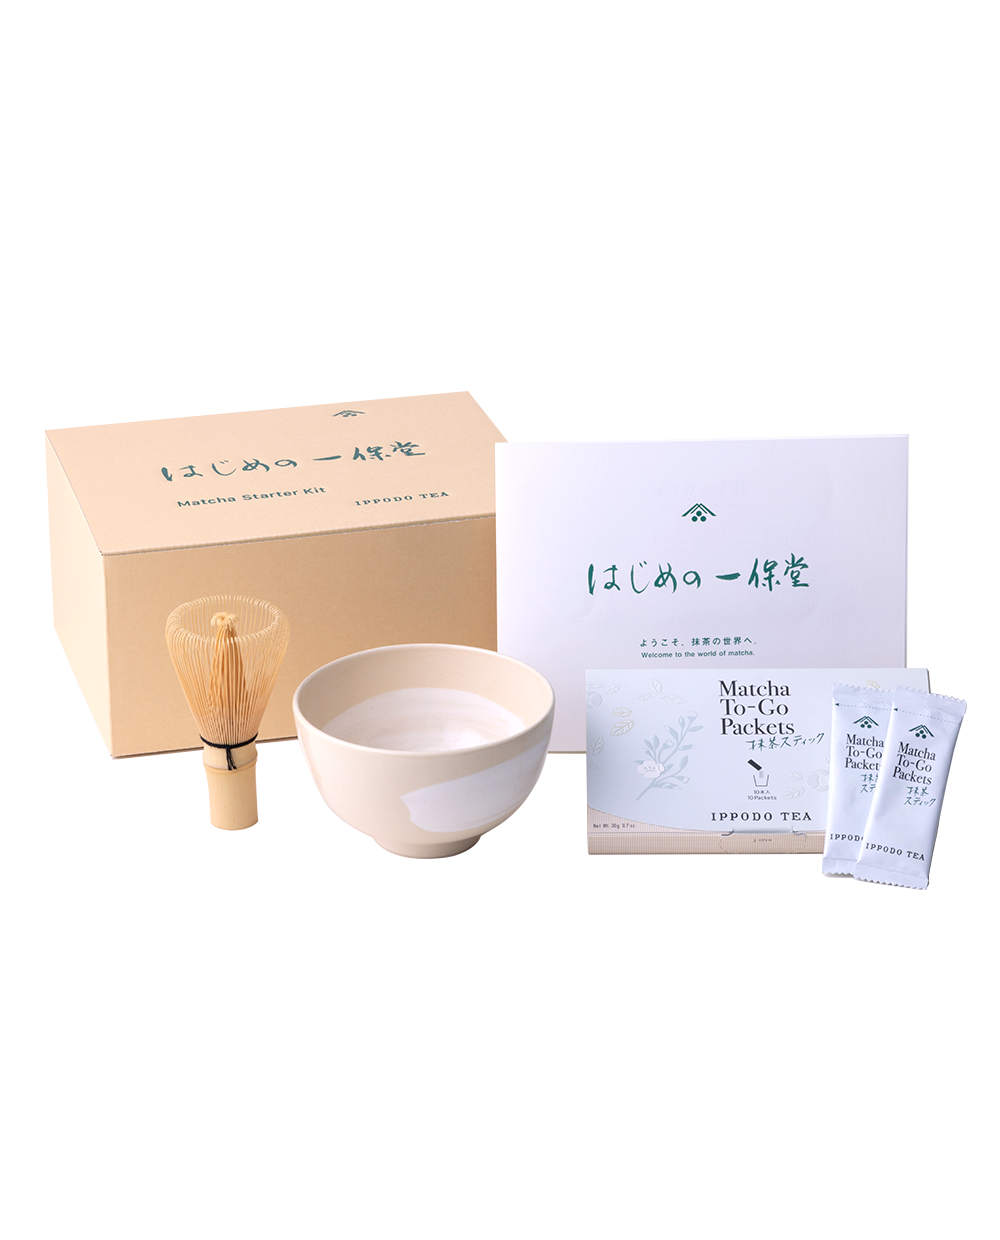 Ippodo Tea - Essential Matcha Kit - For Usucha, Koicha and Lattes - Rich  and Smooth - Matcha and Utensils - Kyoto Since 1717